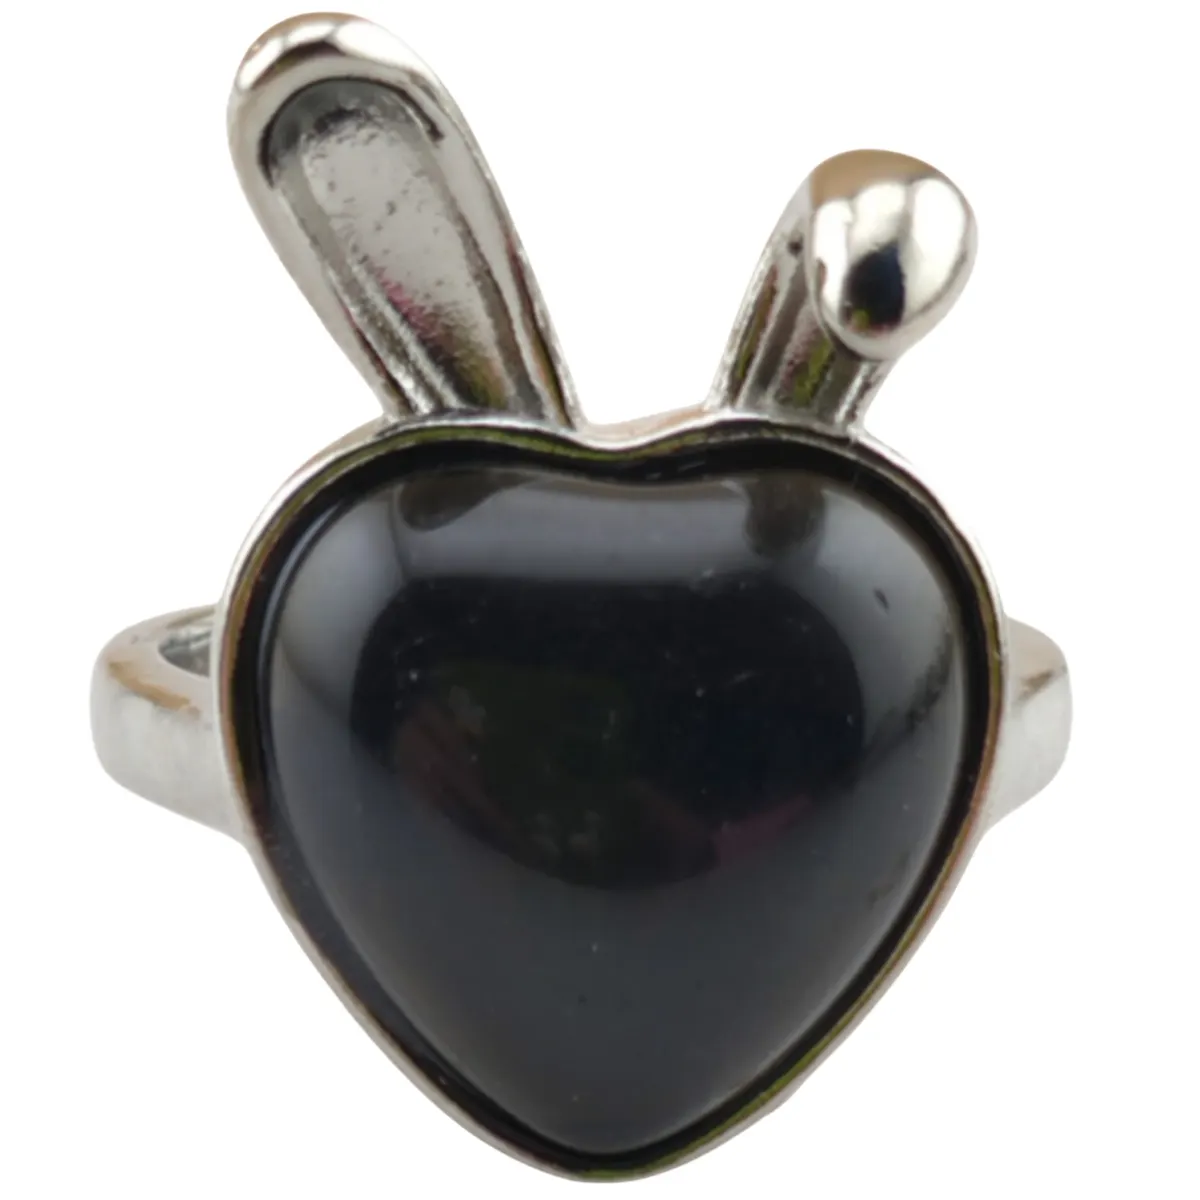 Factory Wholesale Silver Rabbit Black Onyx Stone Rings for Women Girls Love Heart Gemstone Anxiety Relief Jewelry Accessories